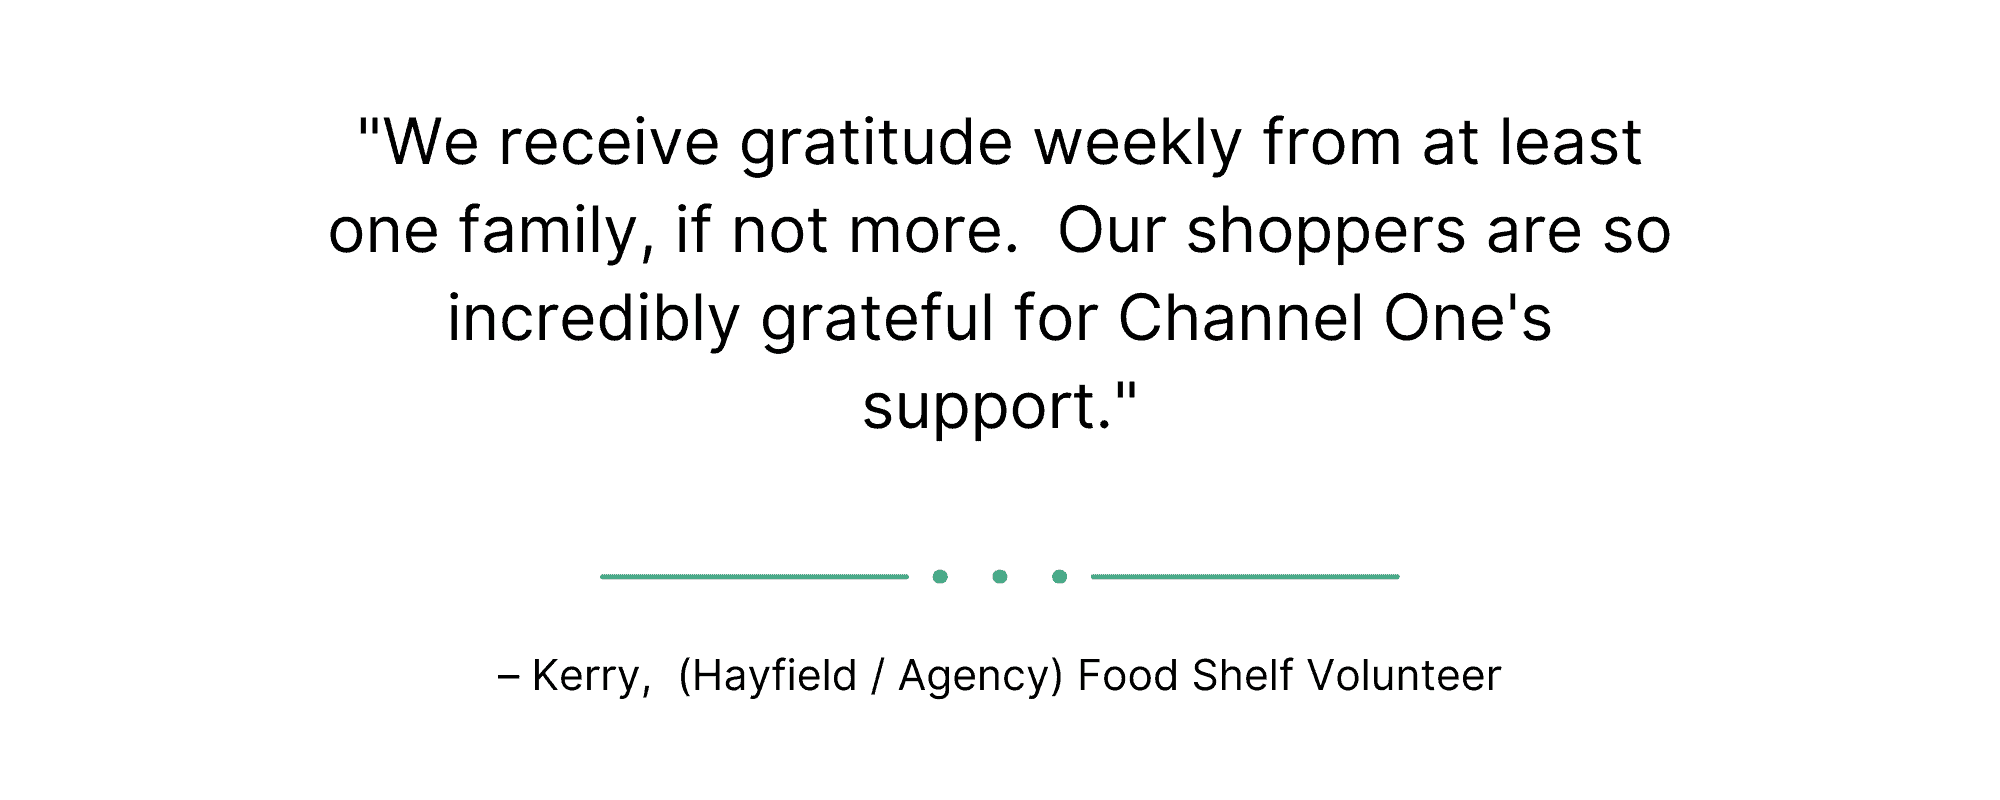 "We receive gratitude weekly from at least one family, if not more. Our shoppers are so incredibly grateful for Channel One's support."